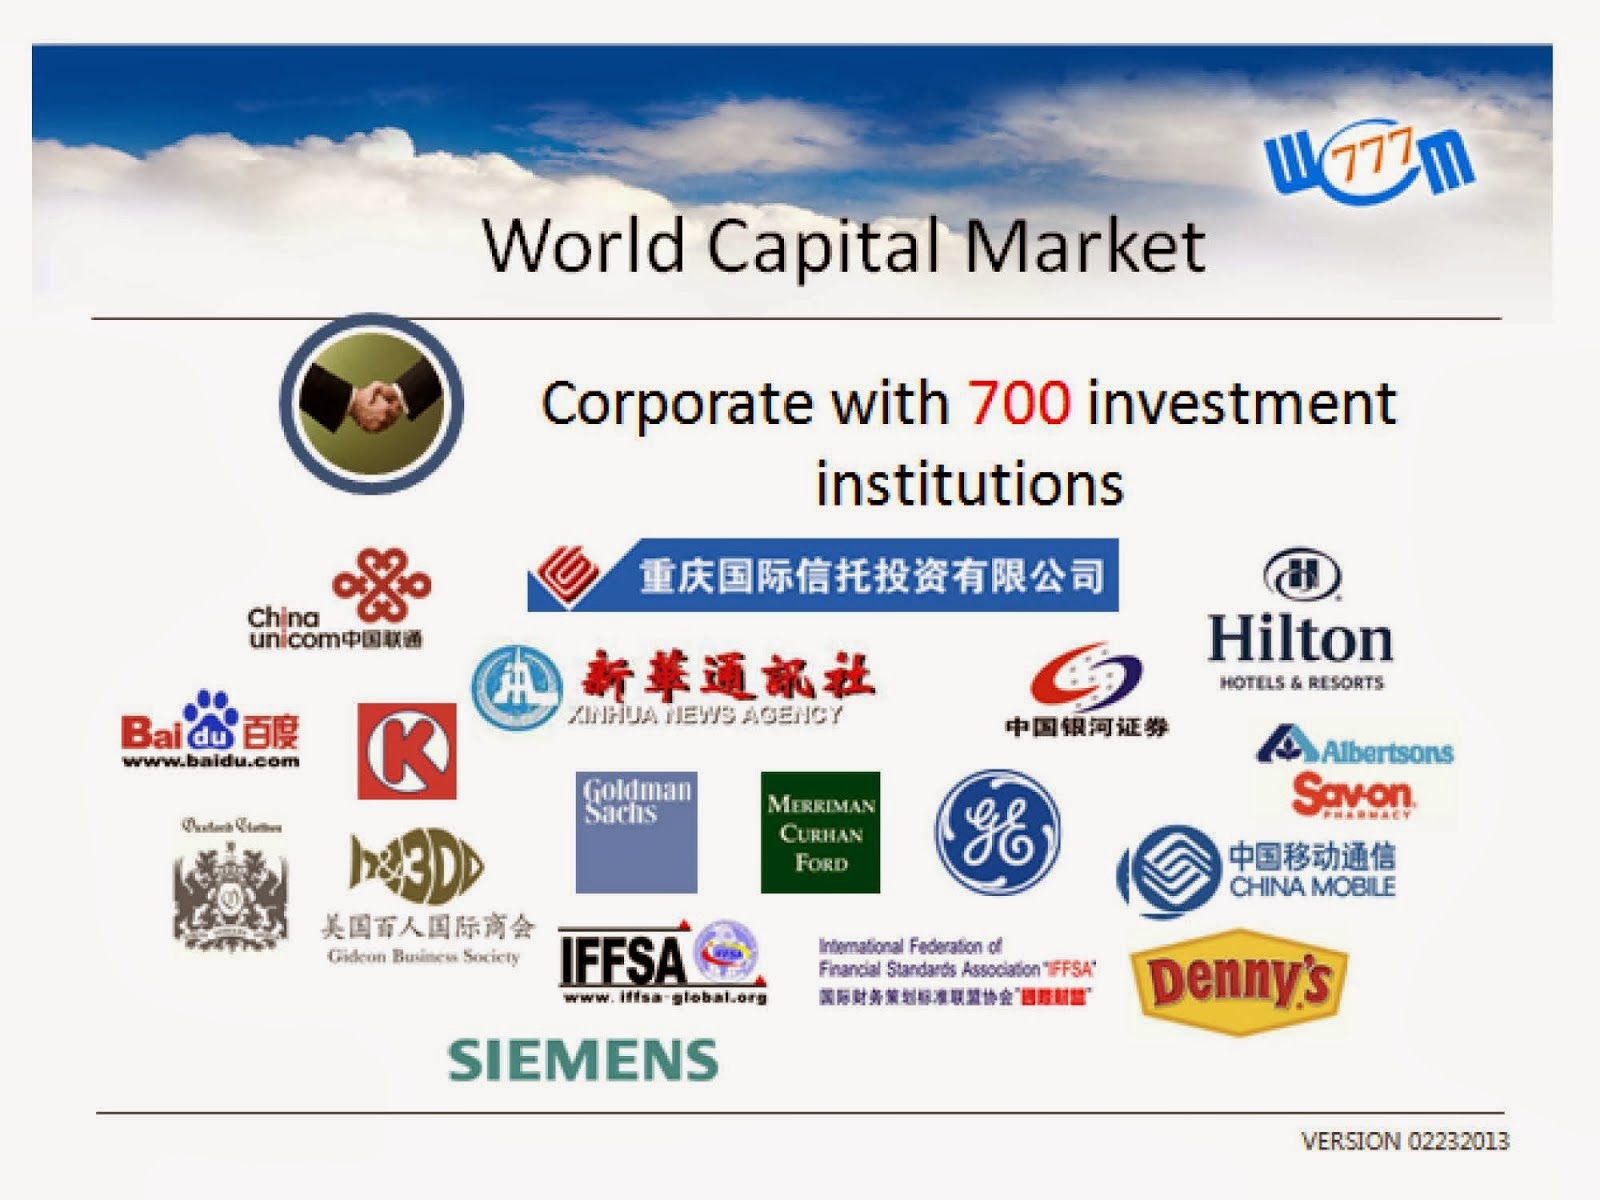 CORPERATE WITH 700 INVESTMENT INSTITUTIONS